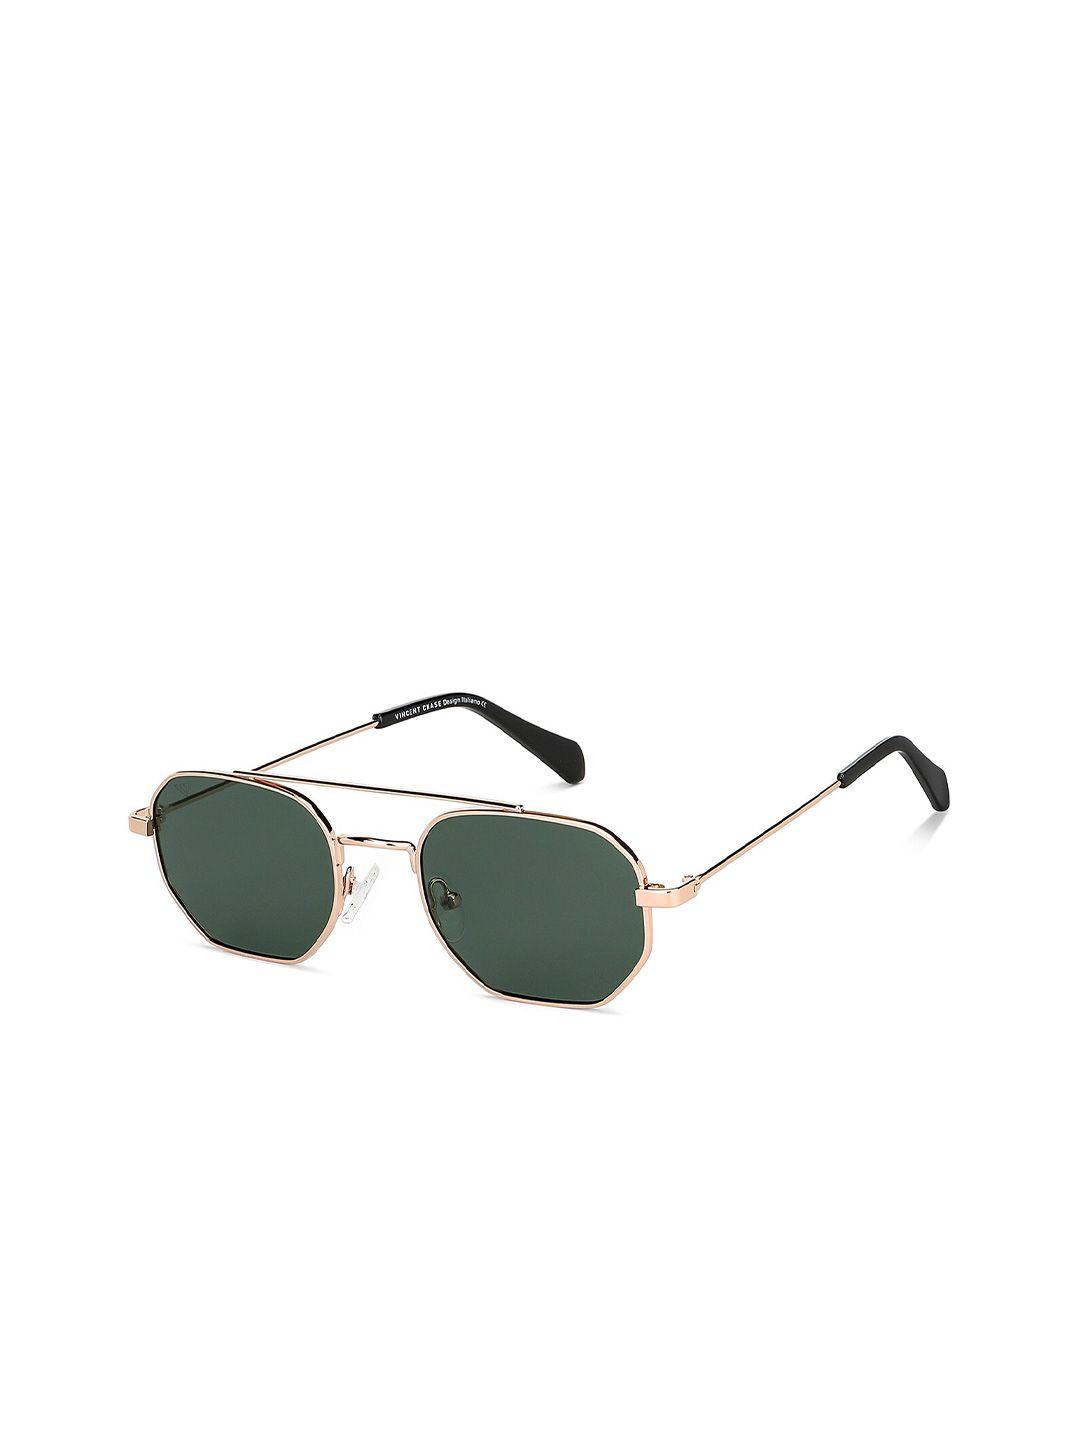 vincent chase unisex green lens other sunglasses with polarised and uv protected lens